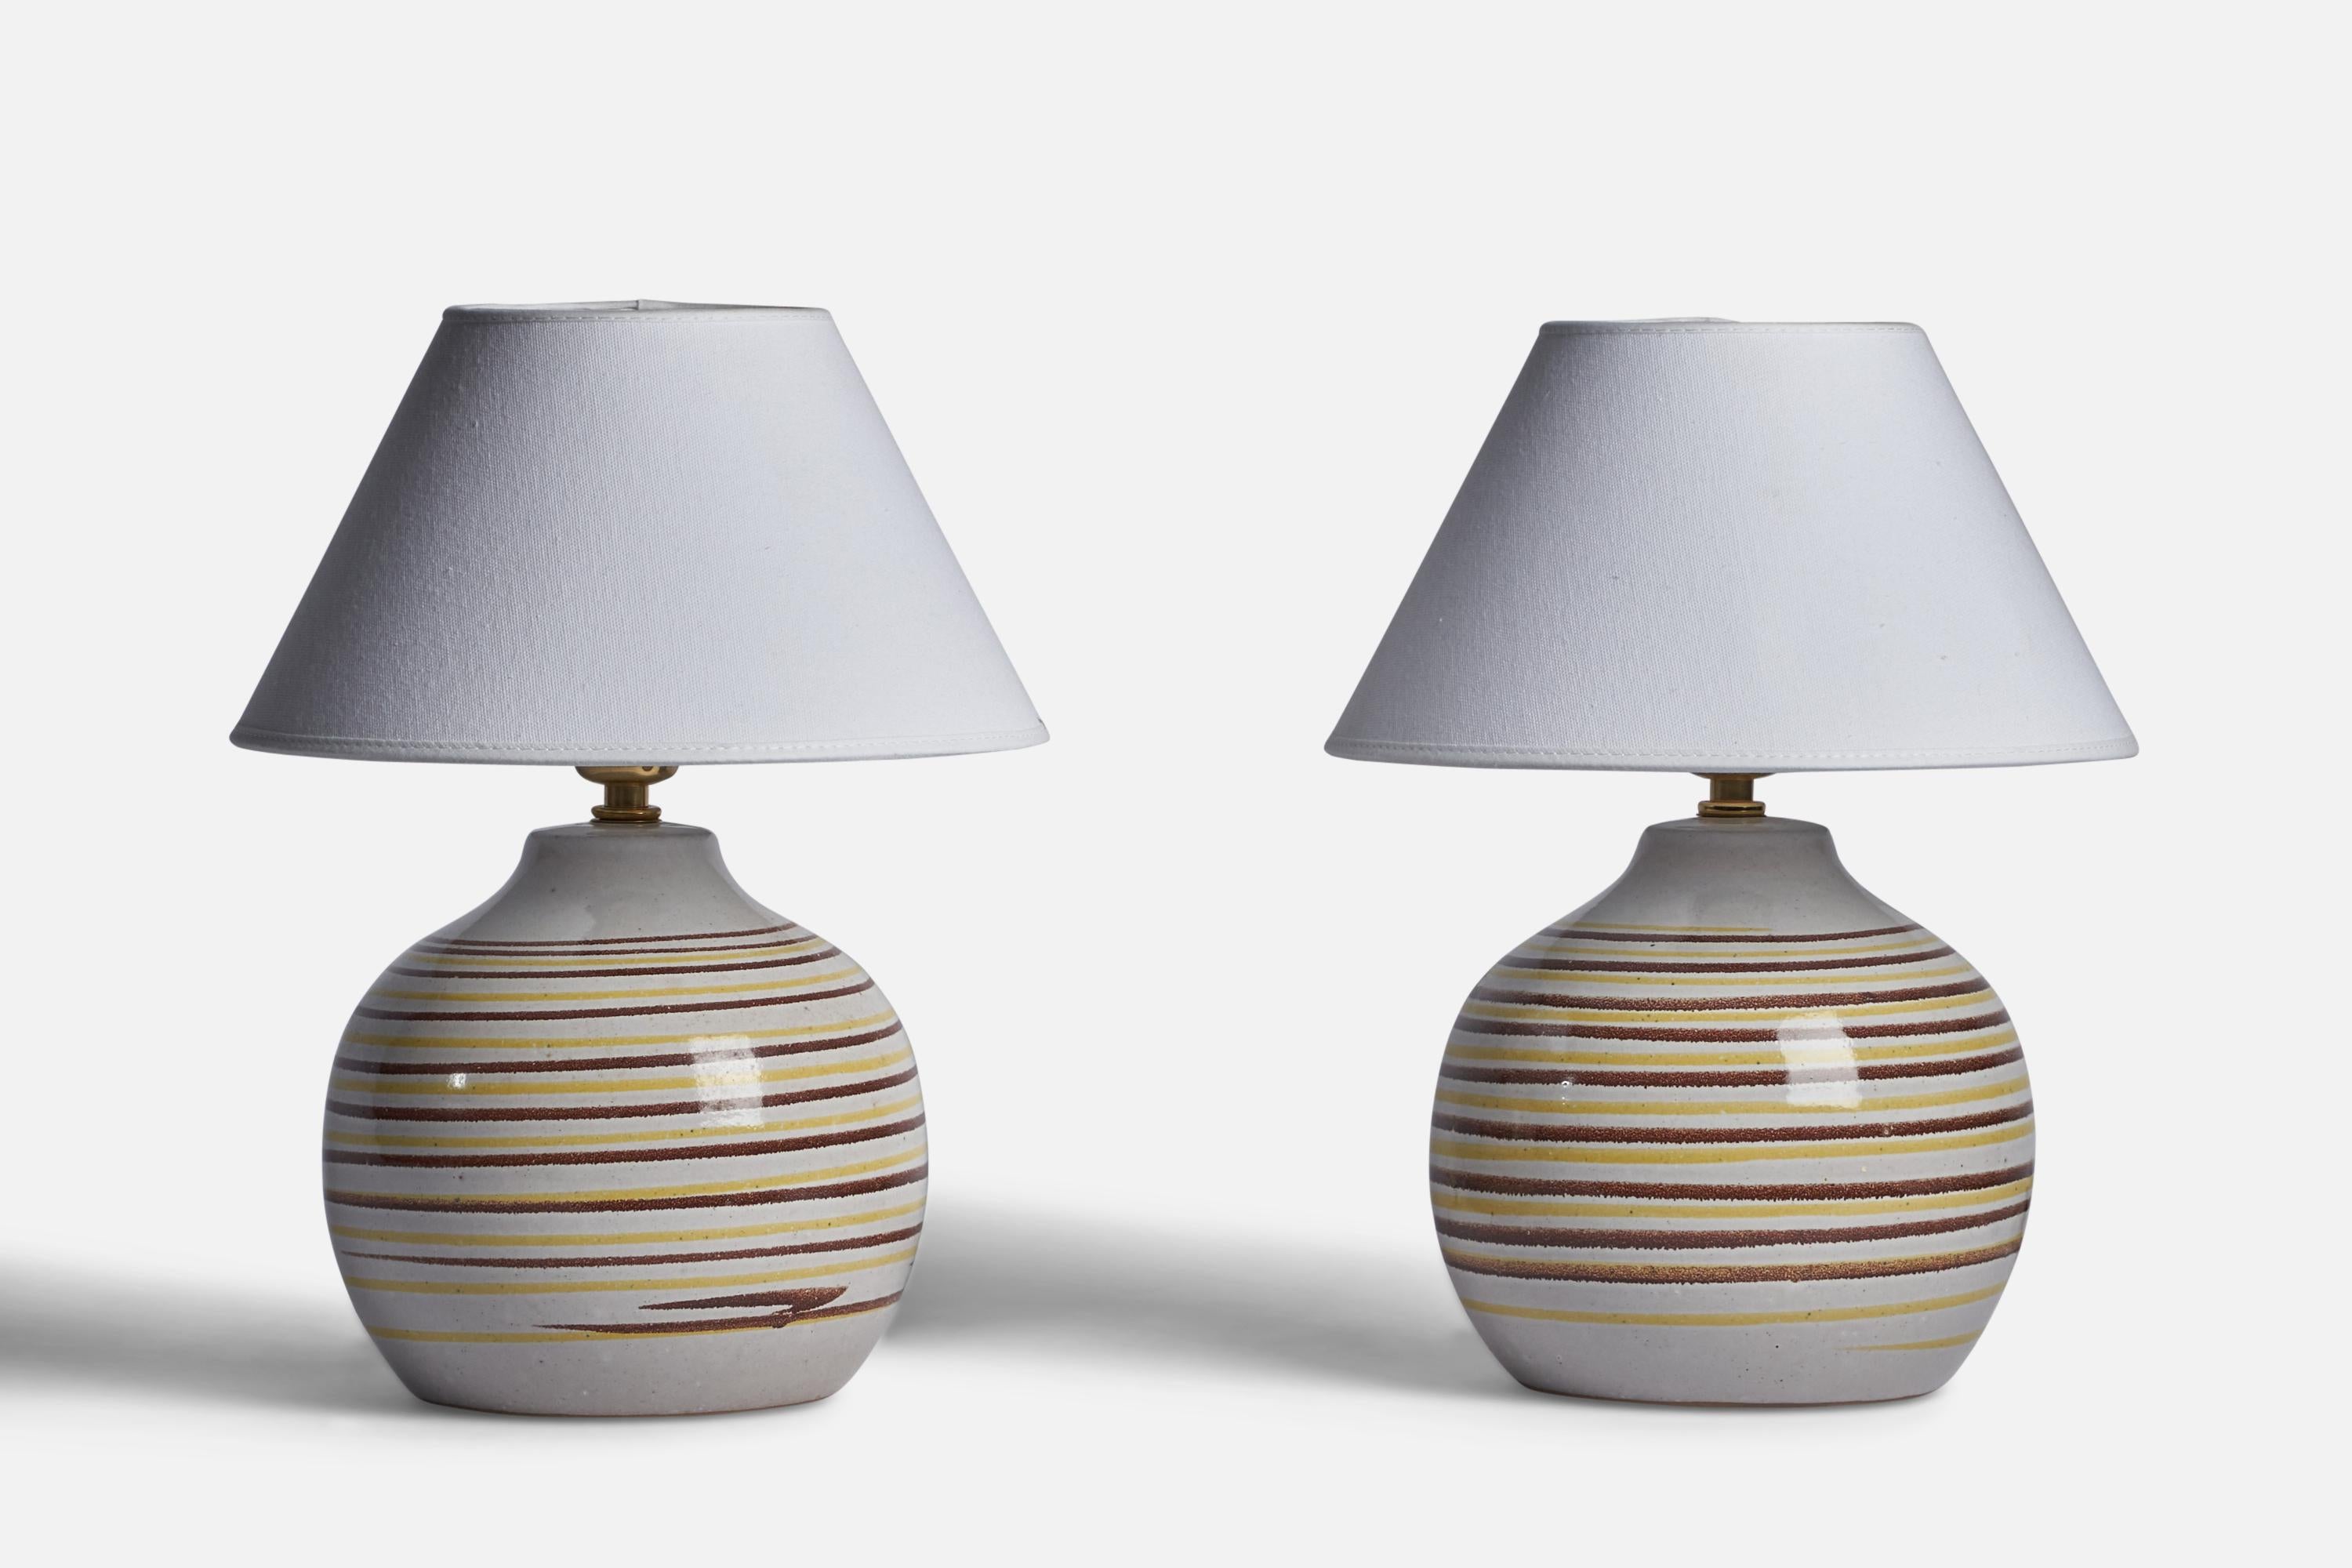 A pair of light grey and brown and yellow-glazed ceramic table lamp designed by Jane & Gordon Martz and produced by Marshall Studios, USA, 1960s.

Dimensions of Lamp (inches): 10” H x 7.15” Diameter
Dimensions of Shade (inches): 4.5” Top Diameter x